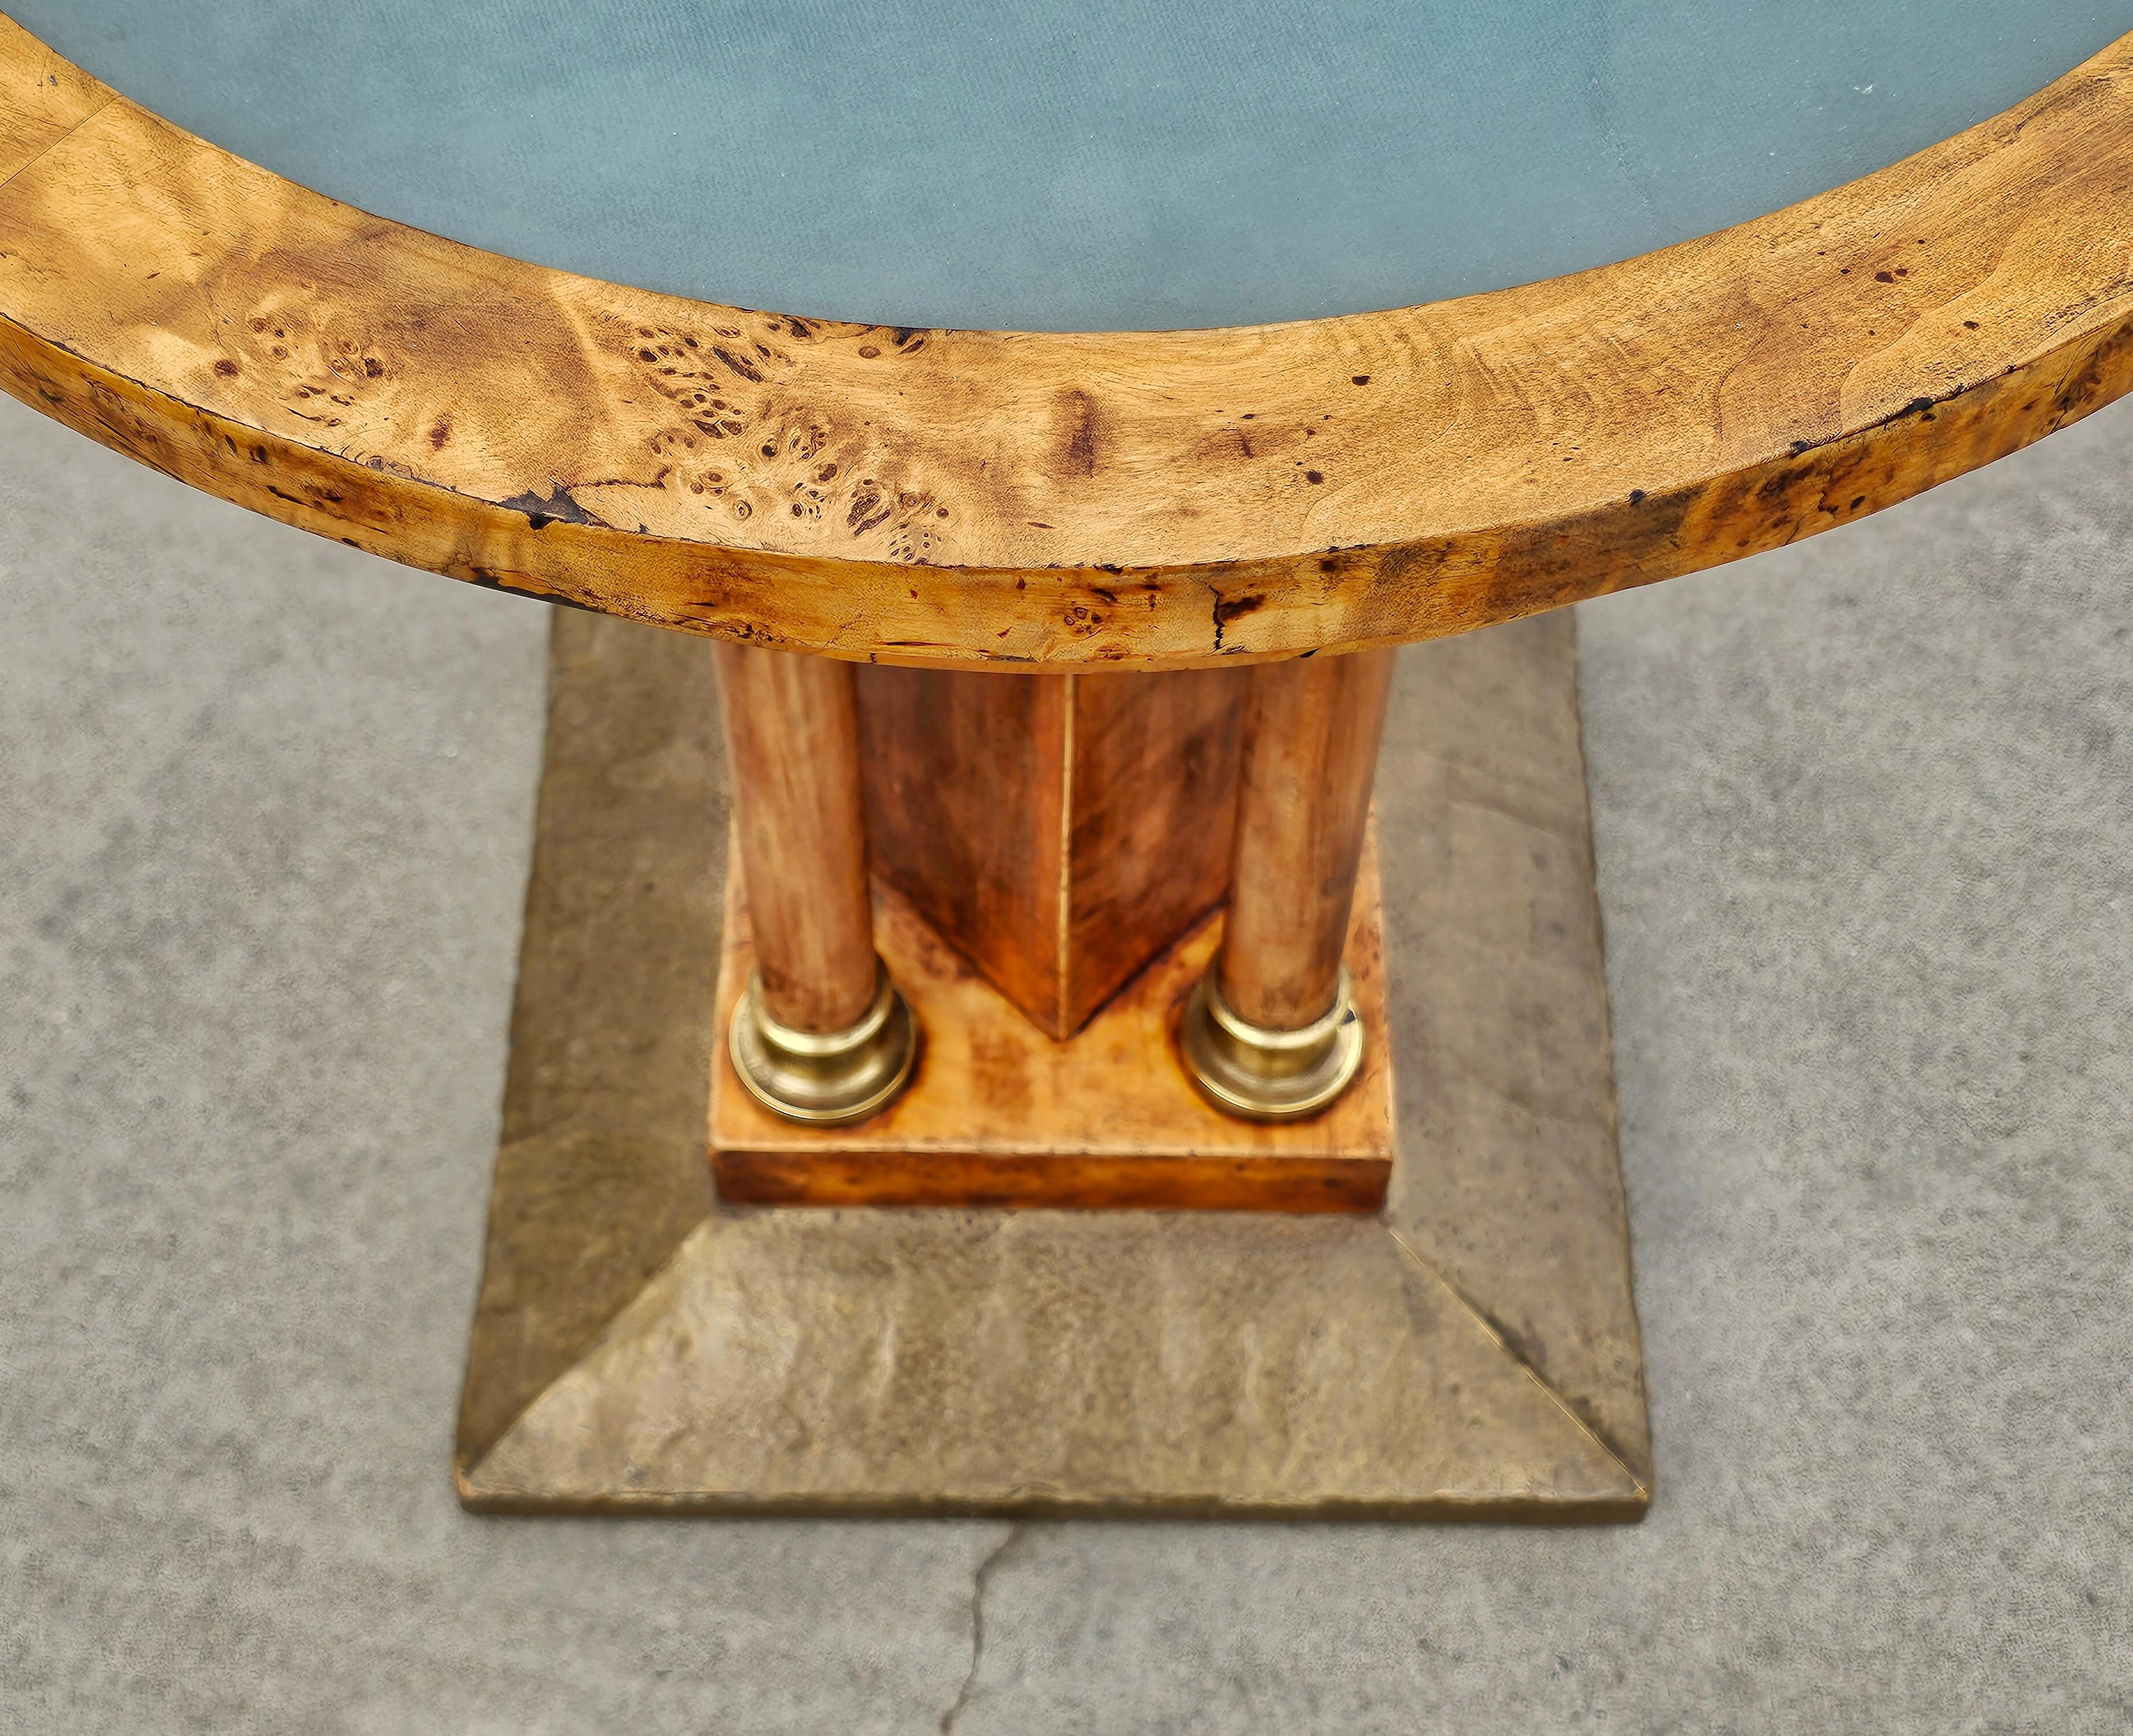 Early 20th Century Viennese Secessionist Gueridon Table done in Birdseye Maple, Austria 1900s For Sale